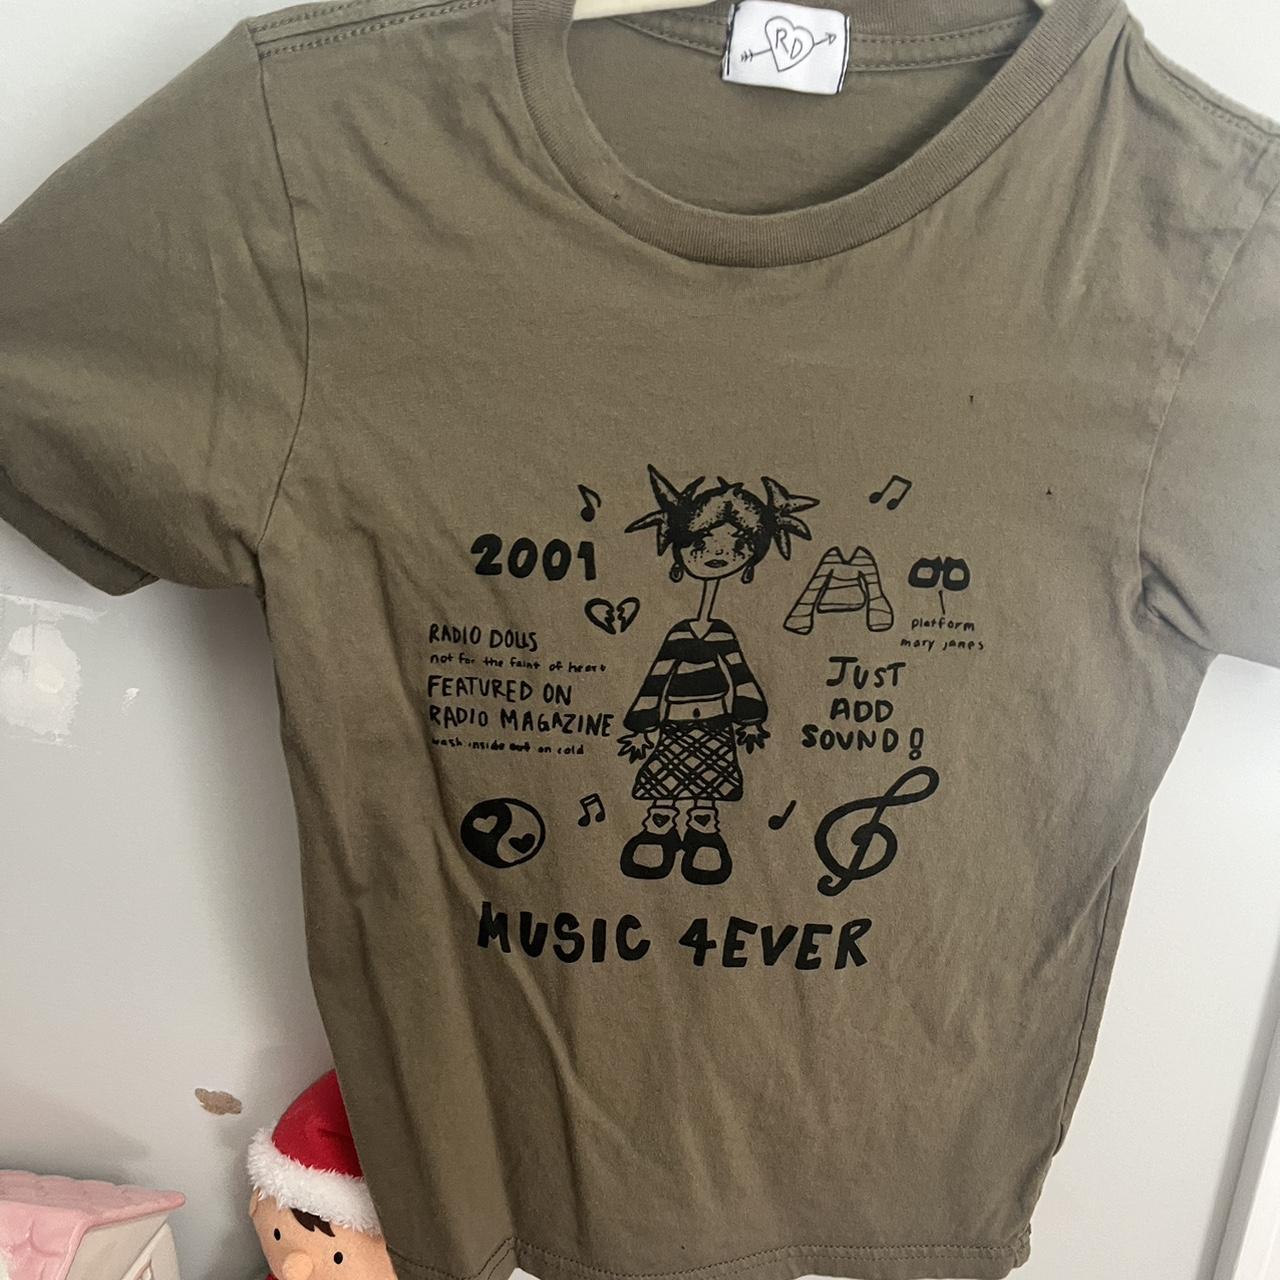 Sealed with a kiss brand baby tee, has the words - Depop